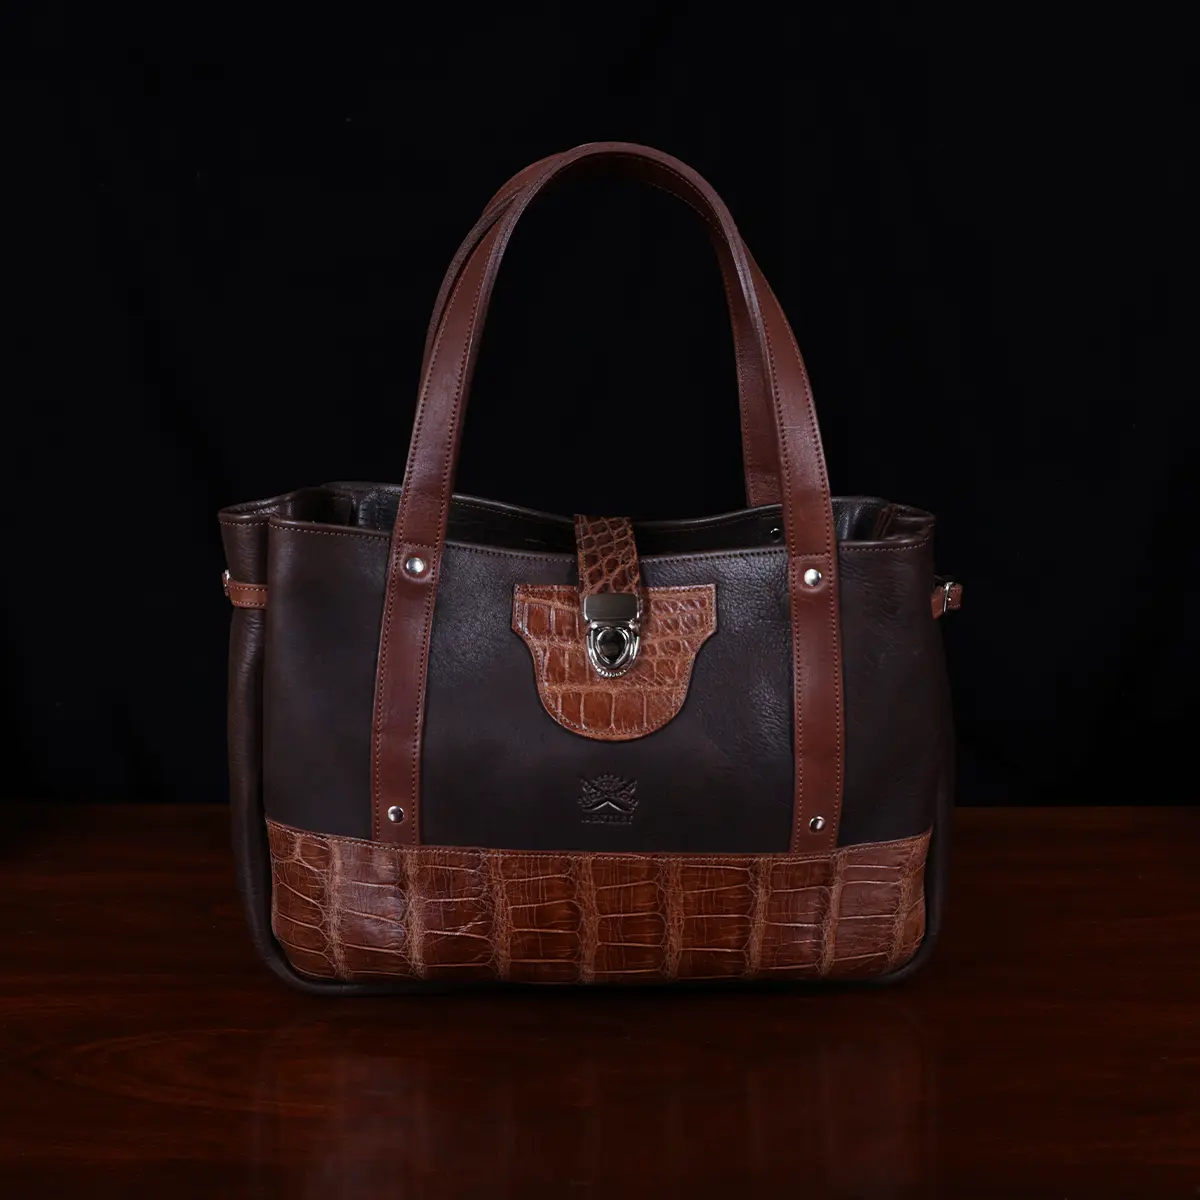 Leather Bentley Tote in dark Tobacco Brown American Buffalo trimmed with American Alligator and Vintage Brown Steerhide - Front View on black background